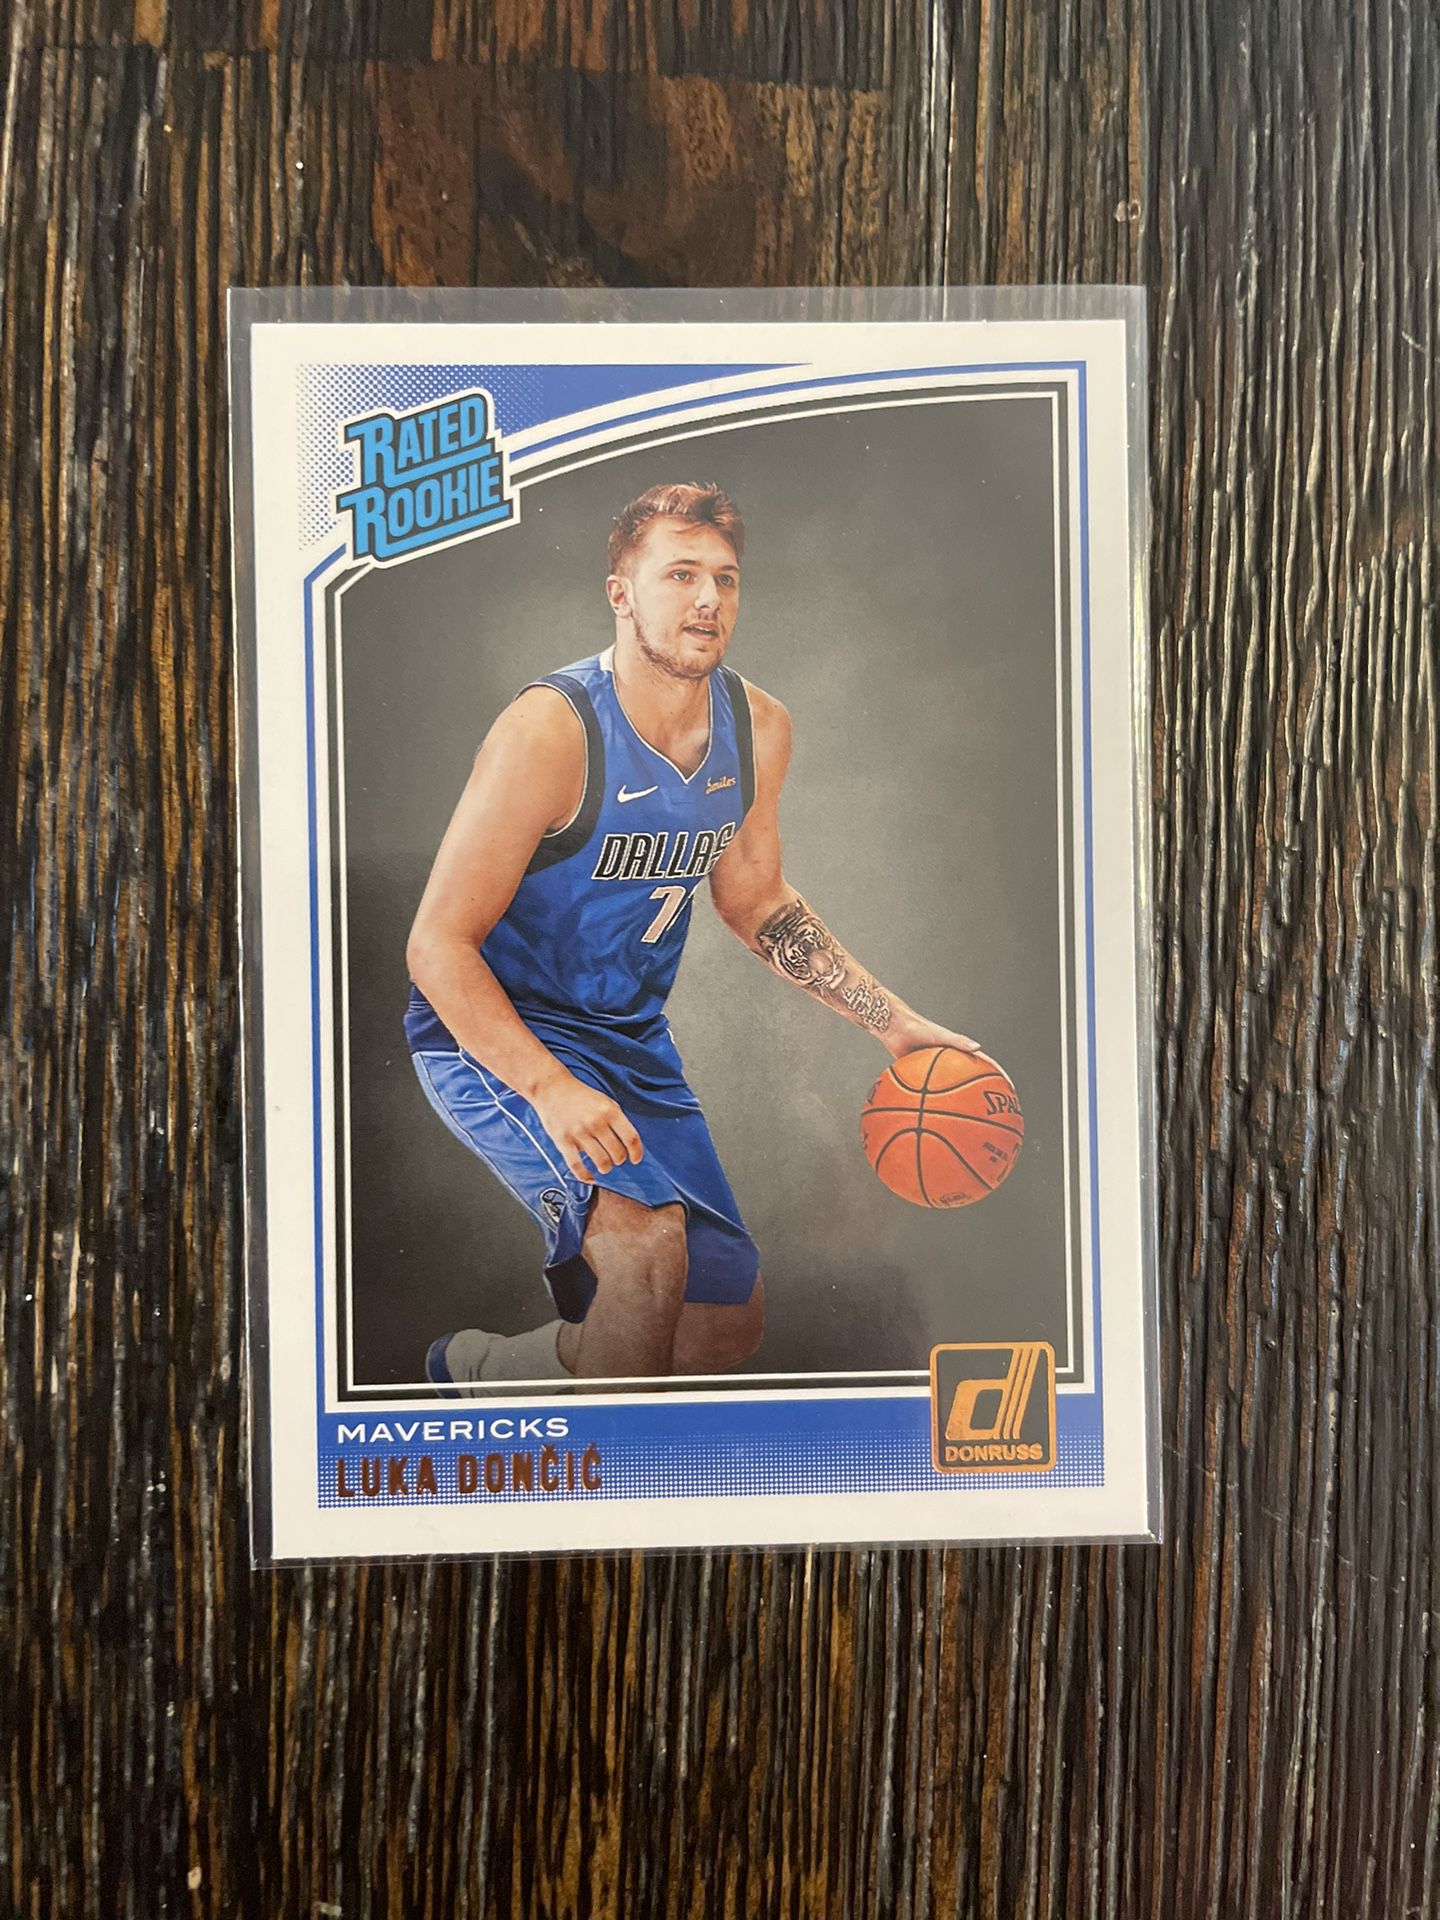 Luka Doncic Rookie Card